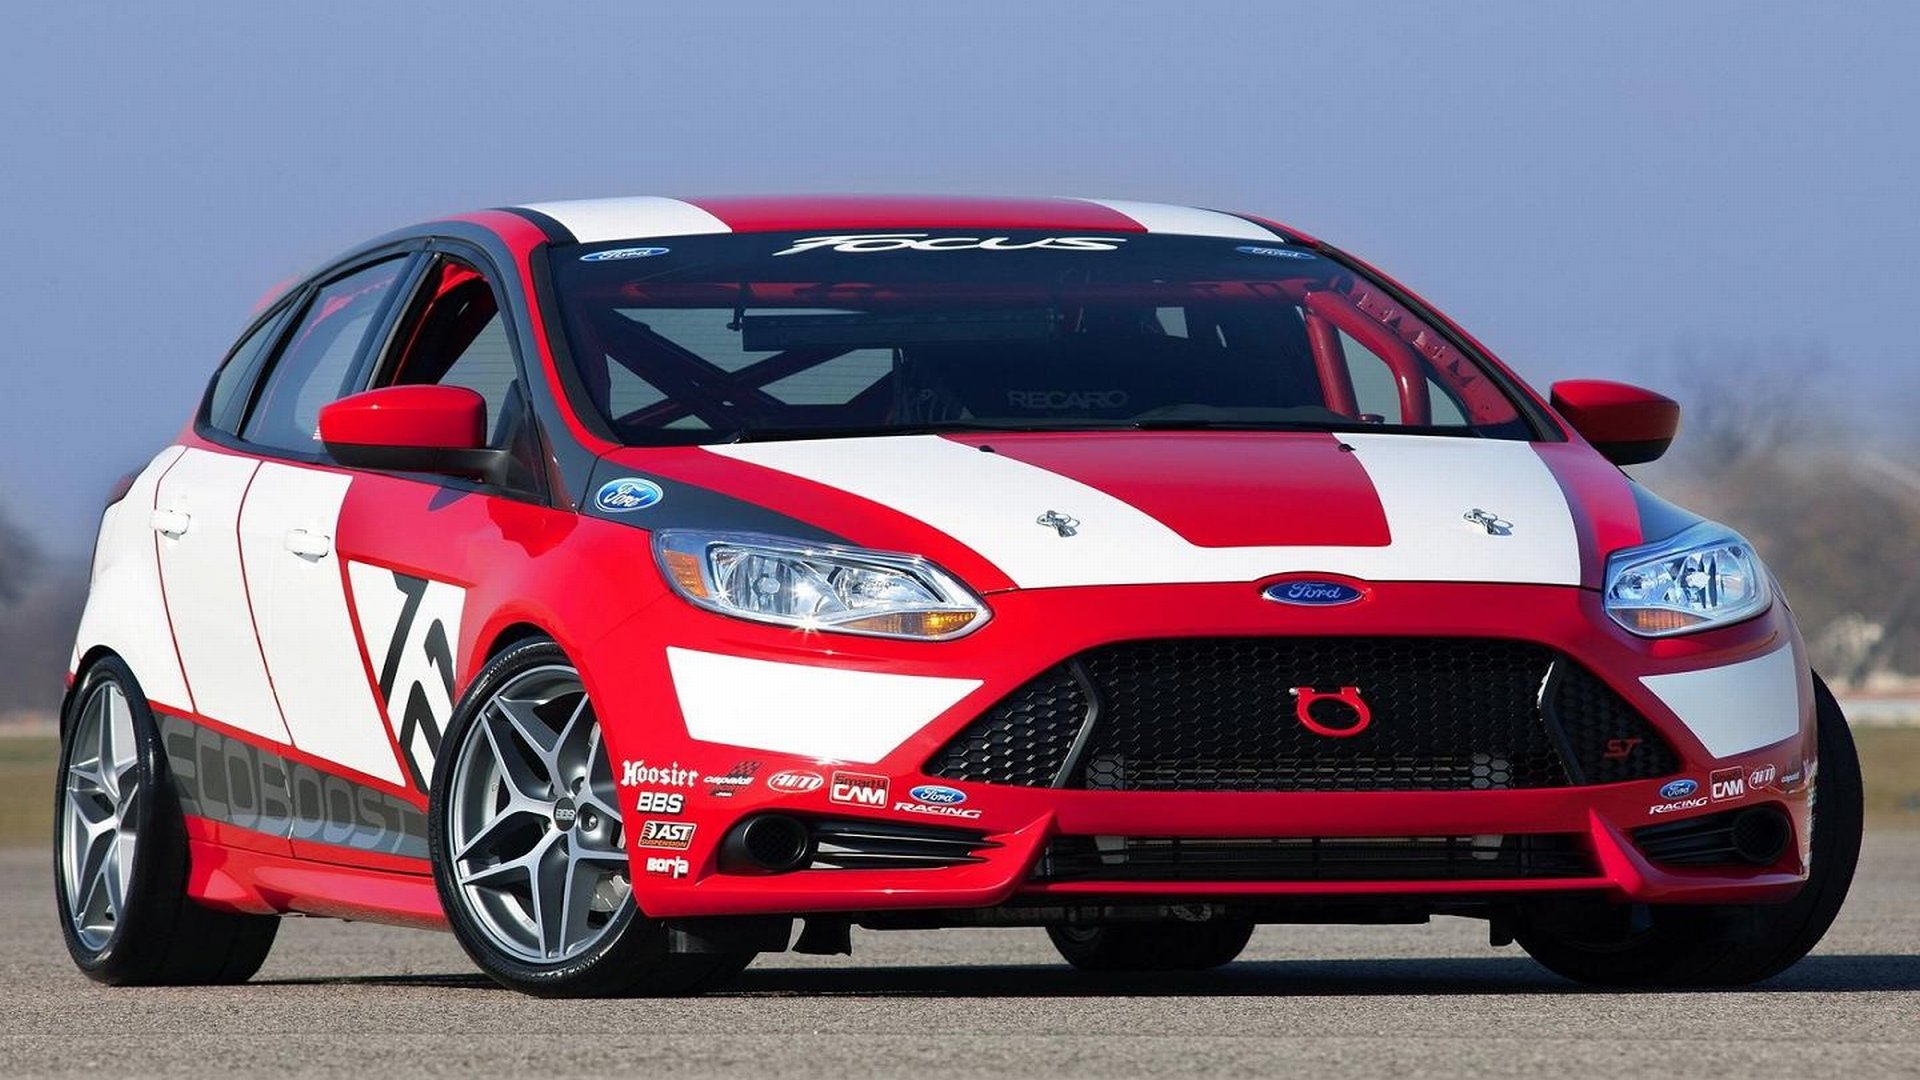 Best Ford Focus wallpaper ID:52520 for High Resolution full hd 1080p computer